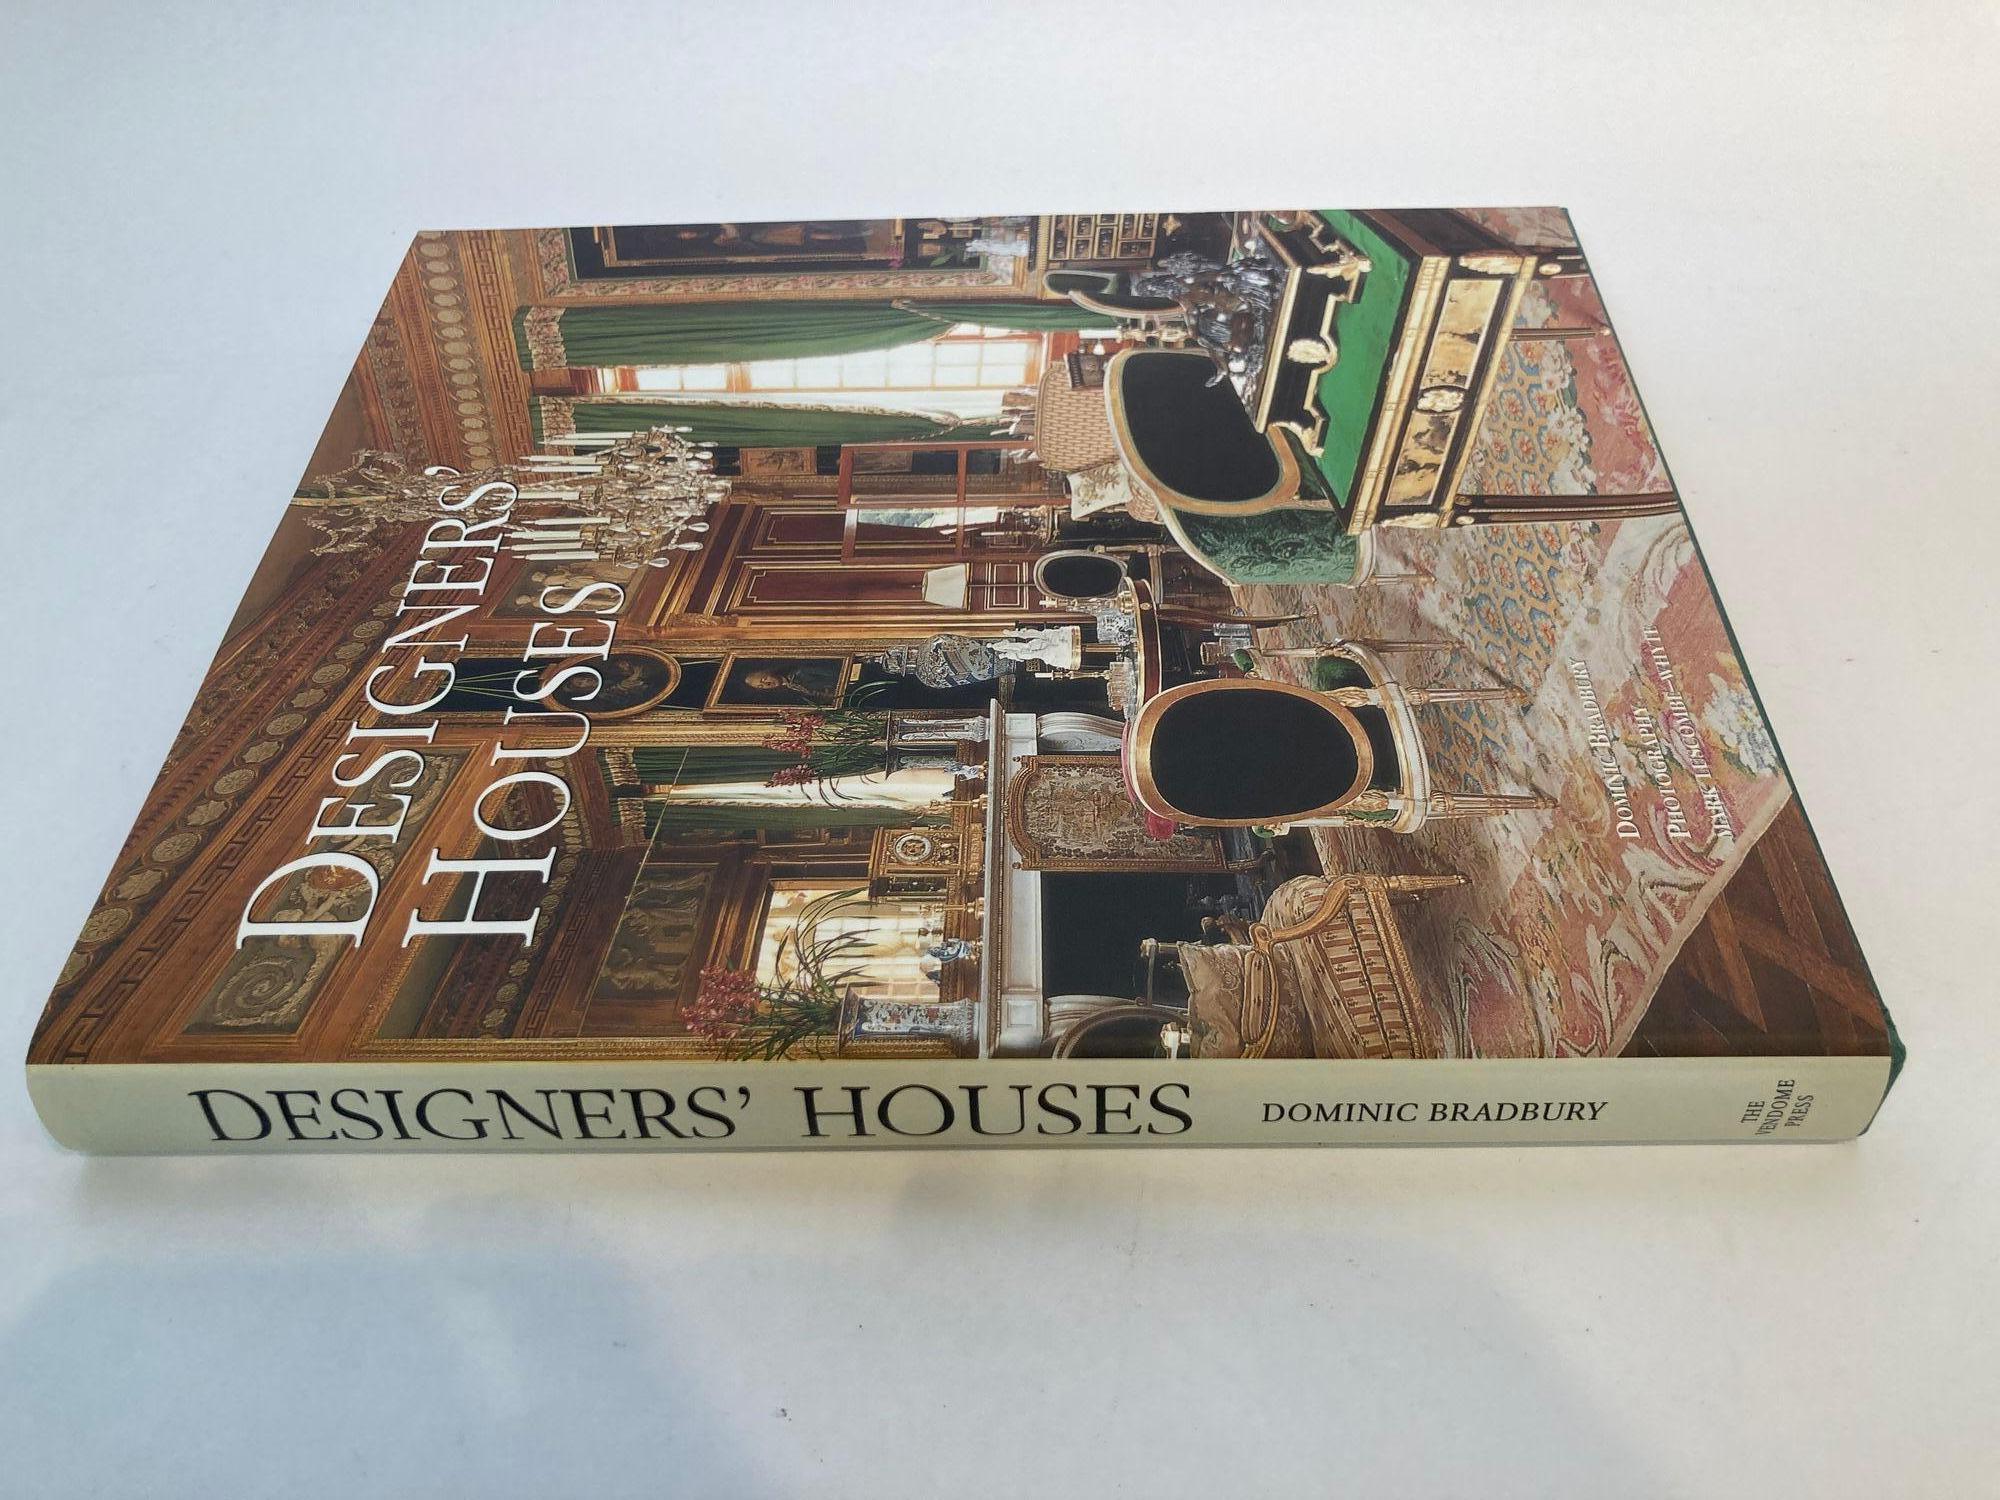 Paper Designers' Houses Hardcover book First Edition By Dominic Bradbury 2001 For Sale